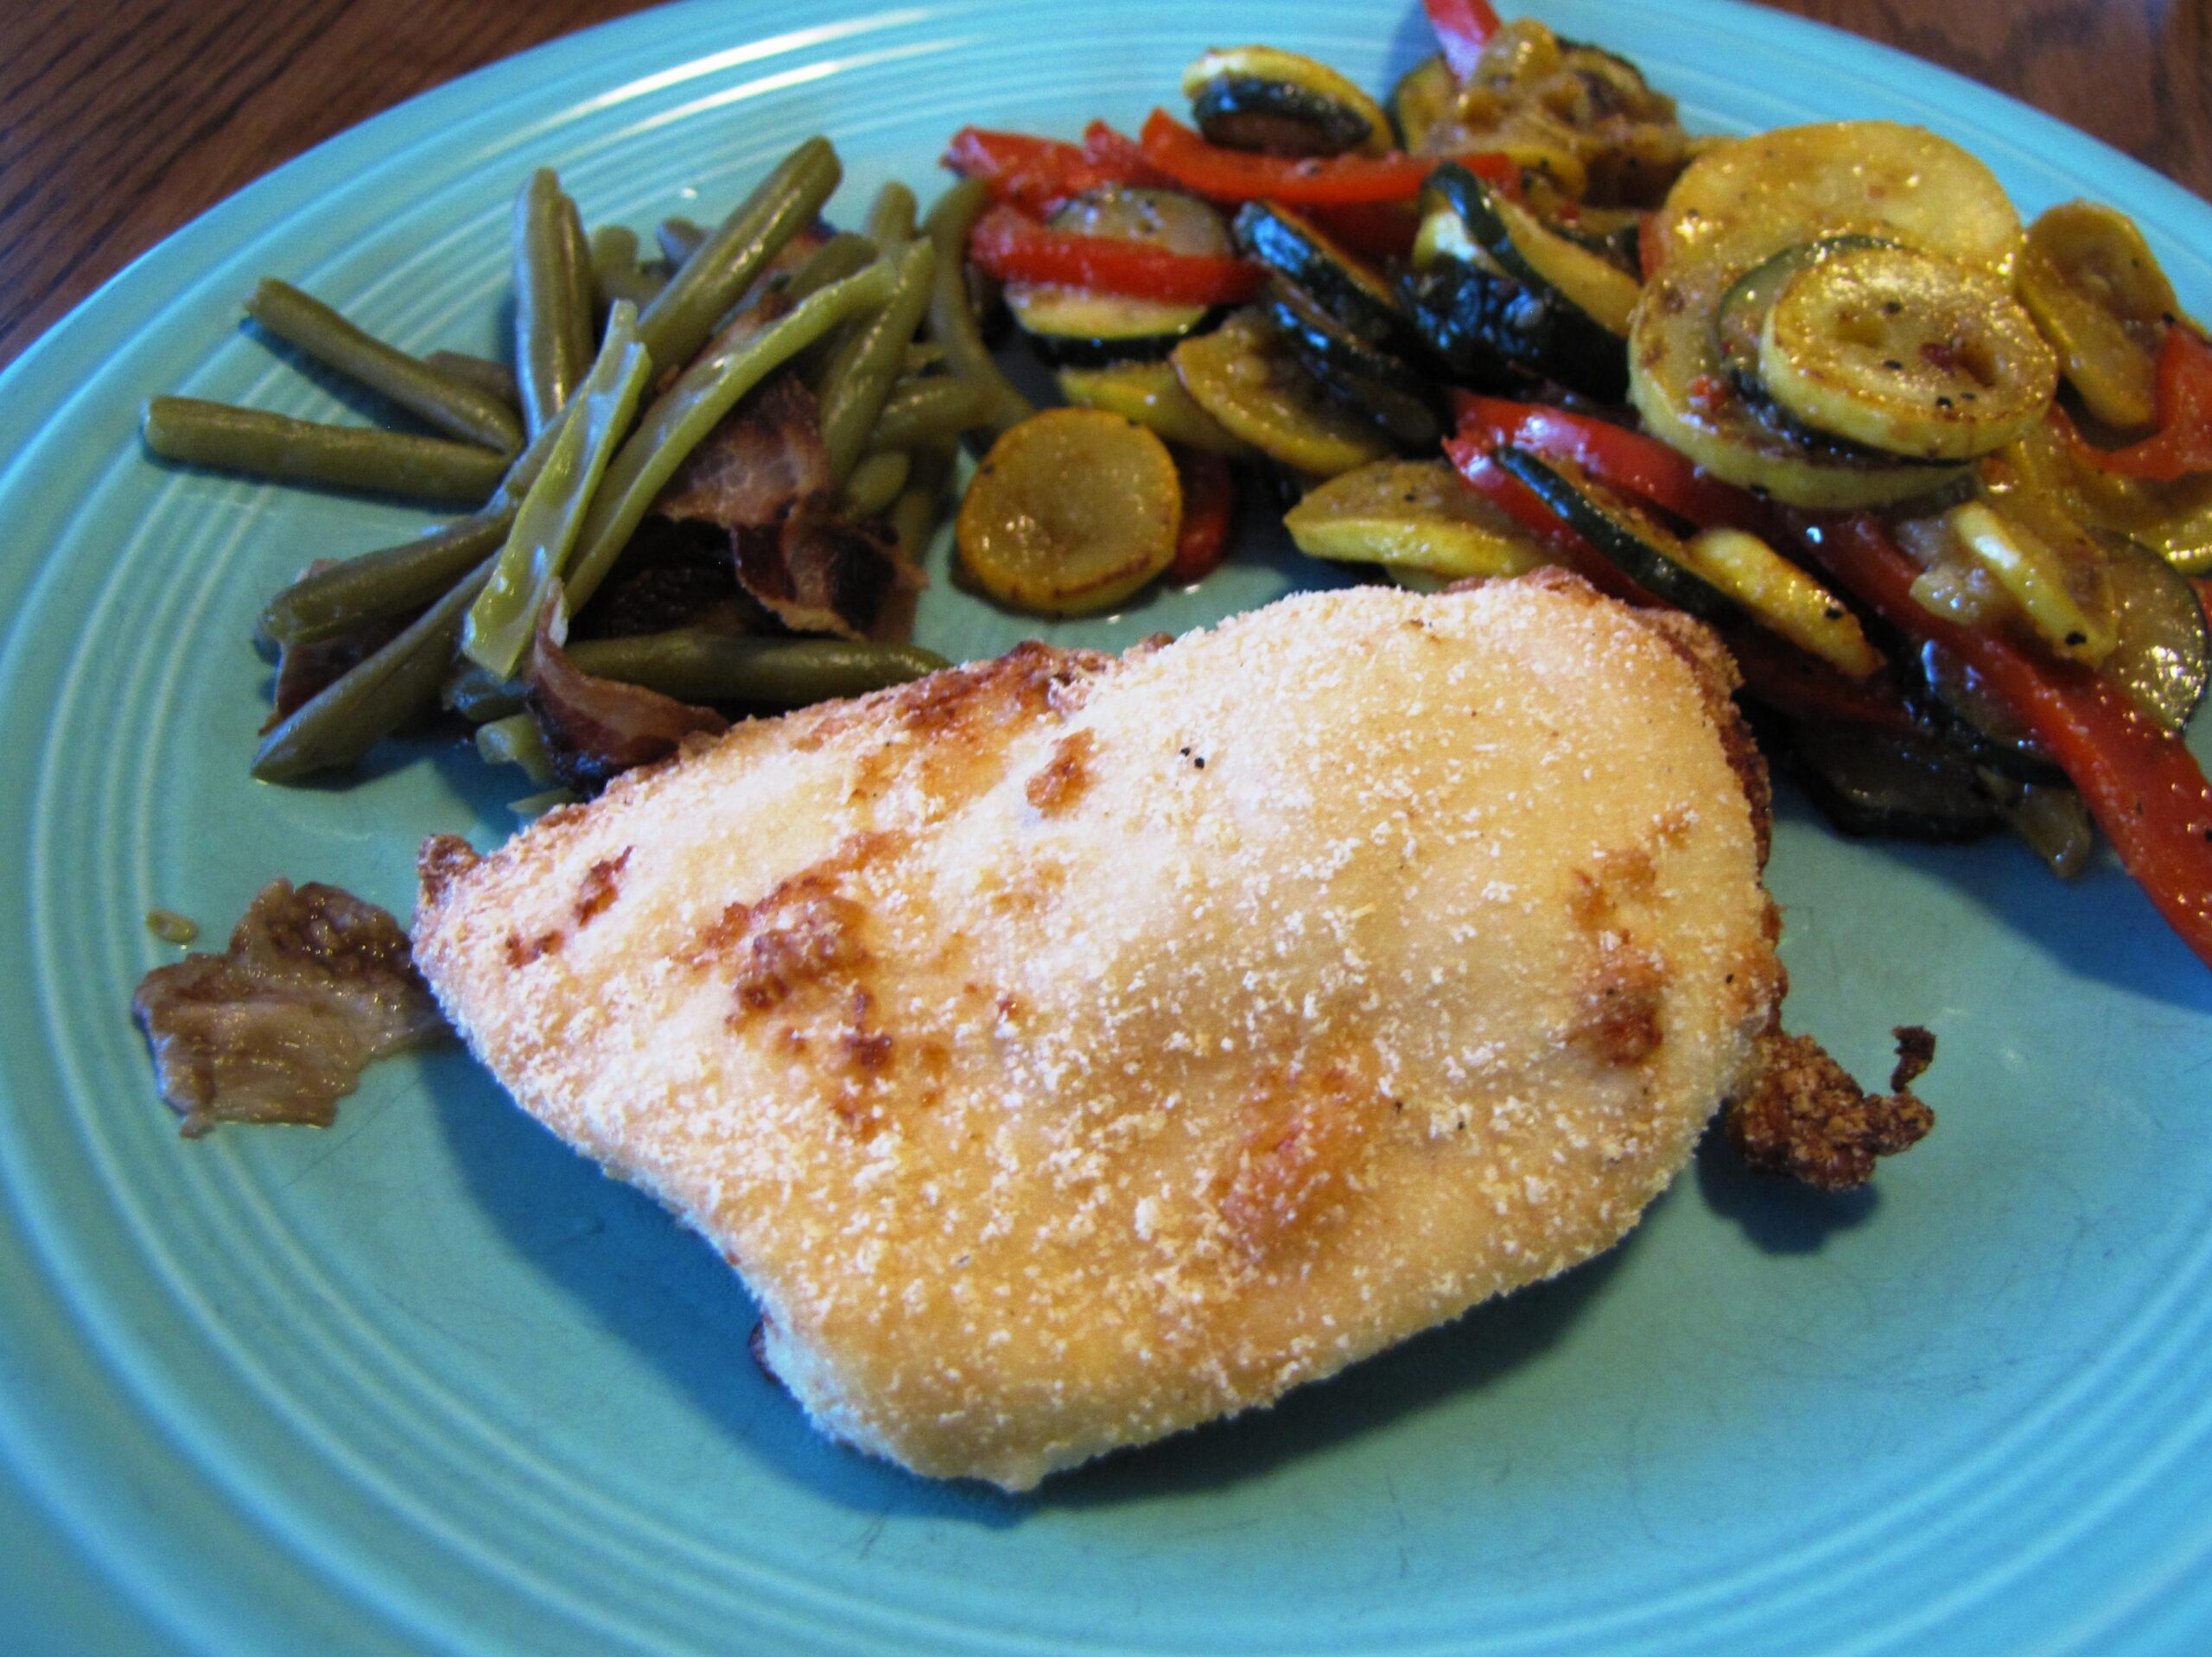 Crispy and Juicy Parmesan Baked Chicken Recipe